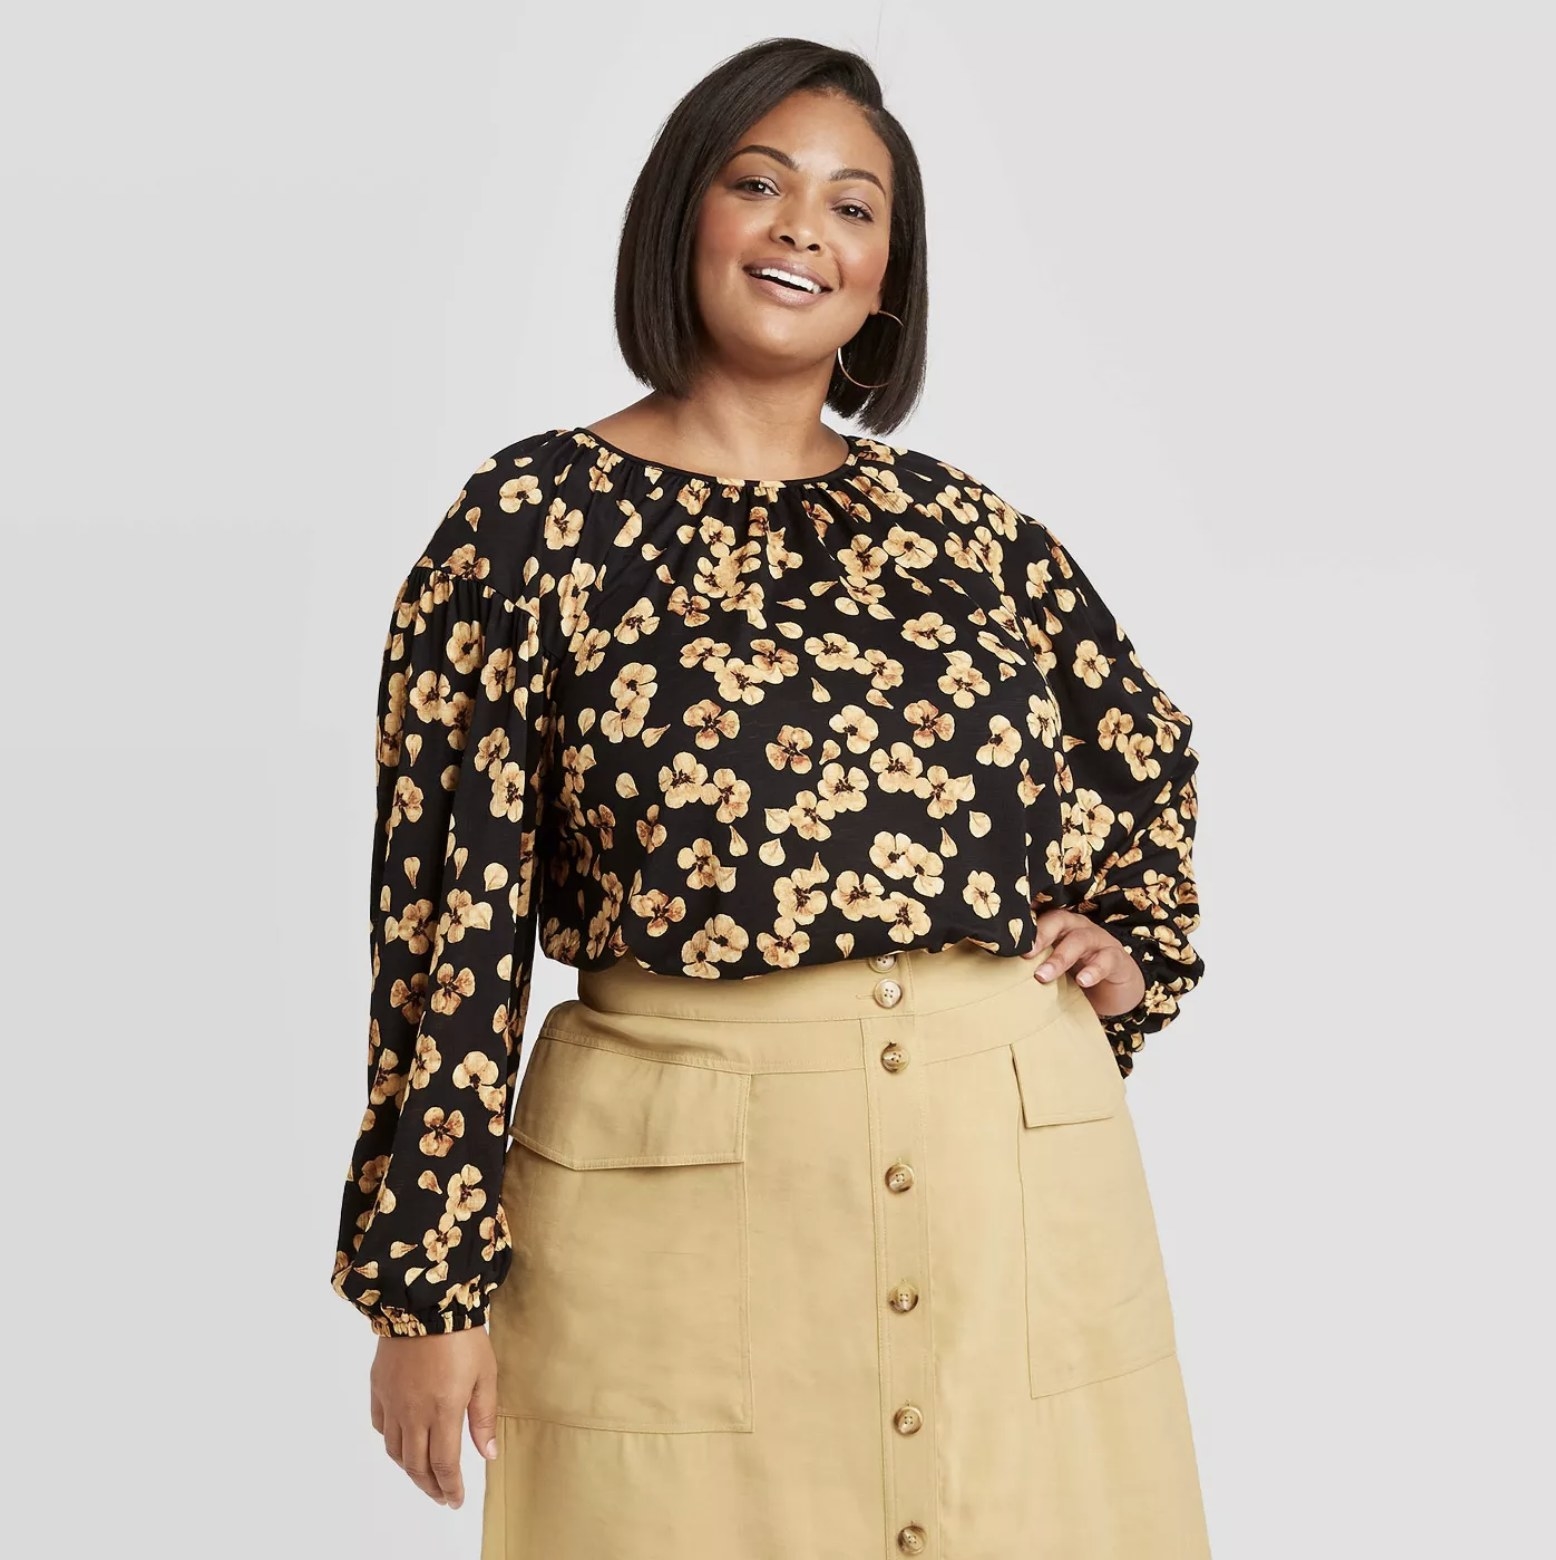 Model wears floral-print blouse with a khaki skirt